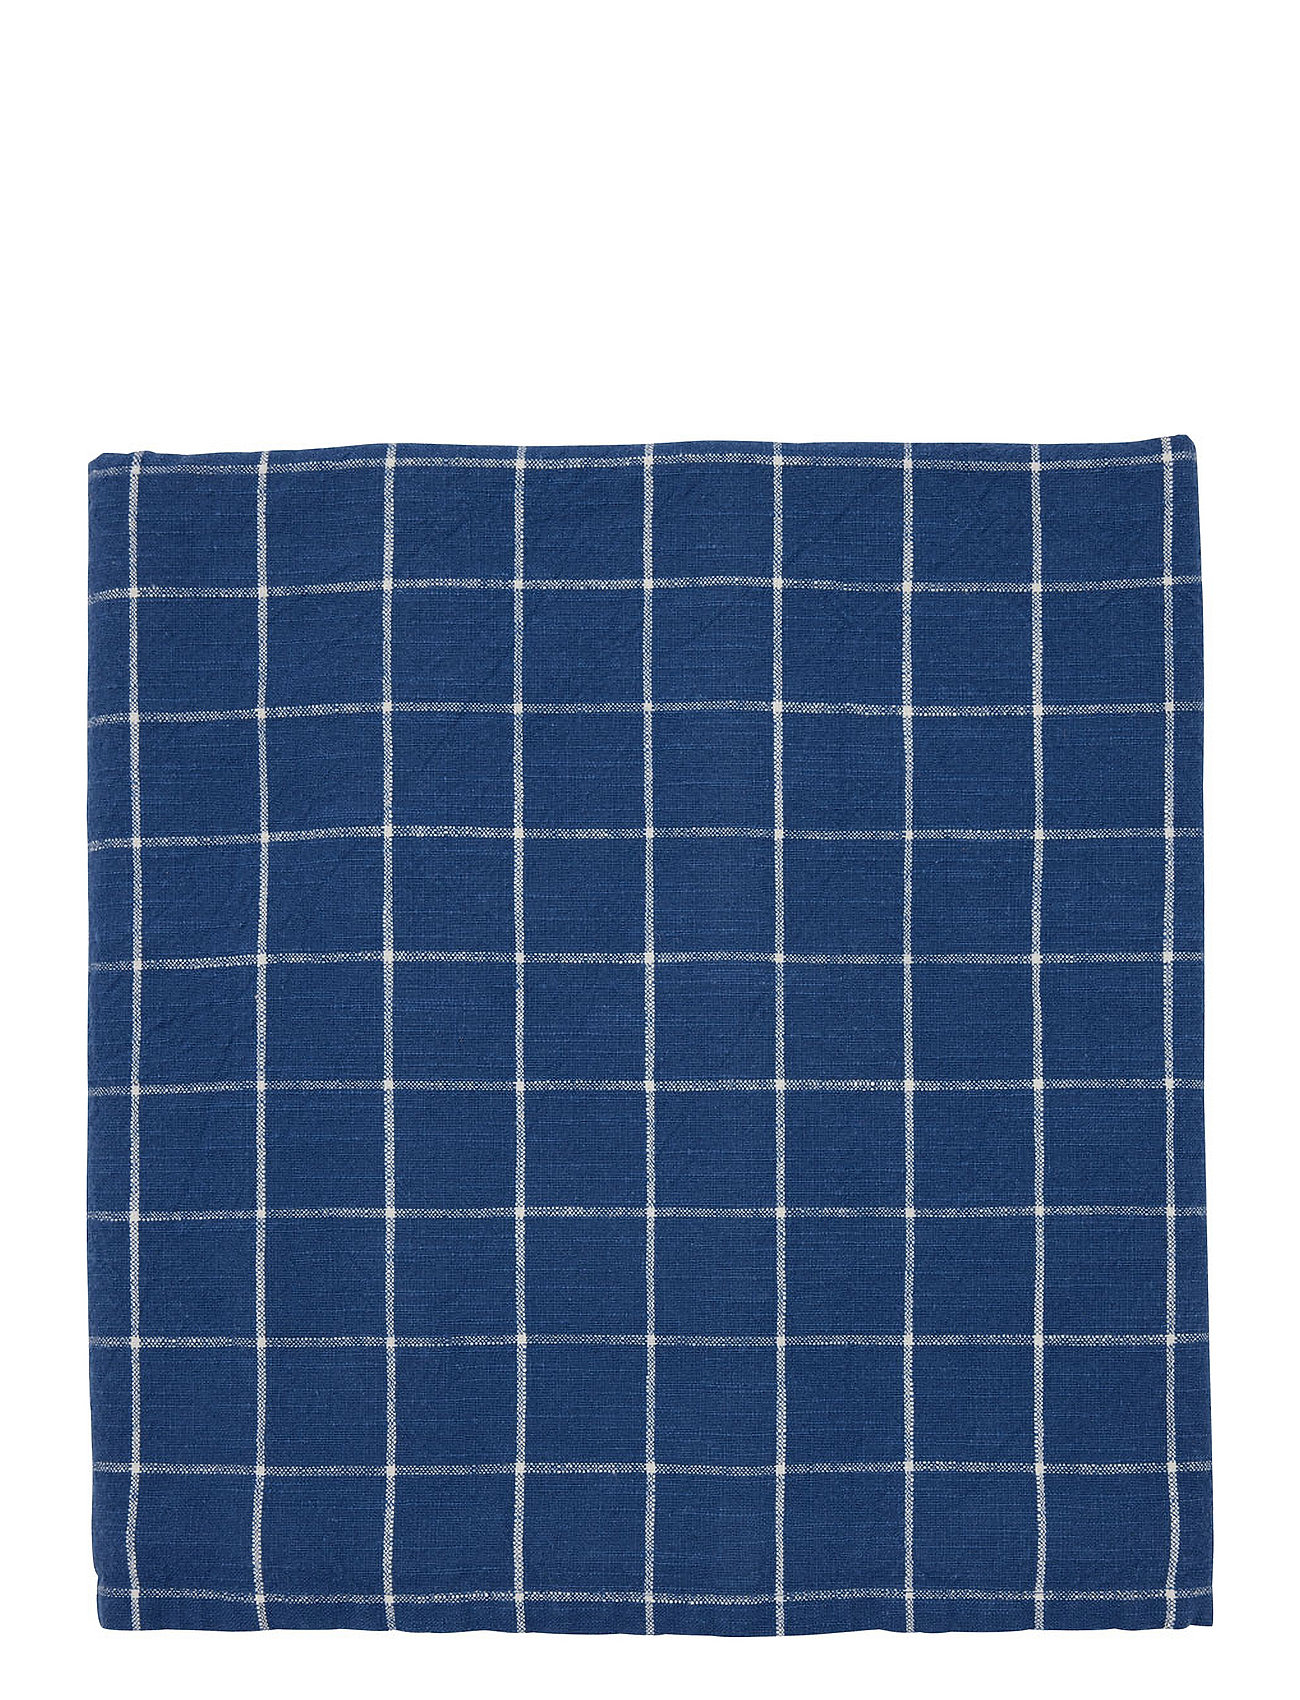 Grid Tablecloth - 260X140 Cm Home Textiles Kitchen Textiles Tablecloths & Table Runners Blue OYOY Living Design